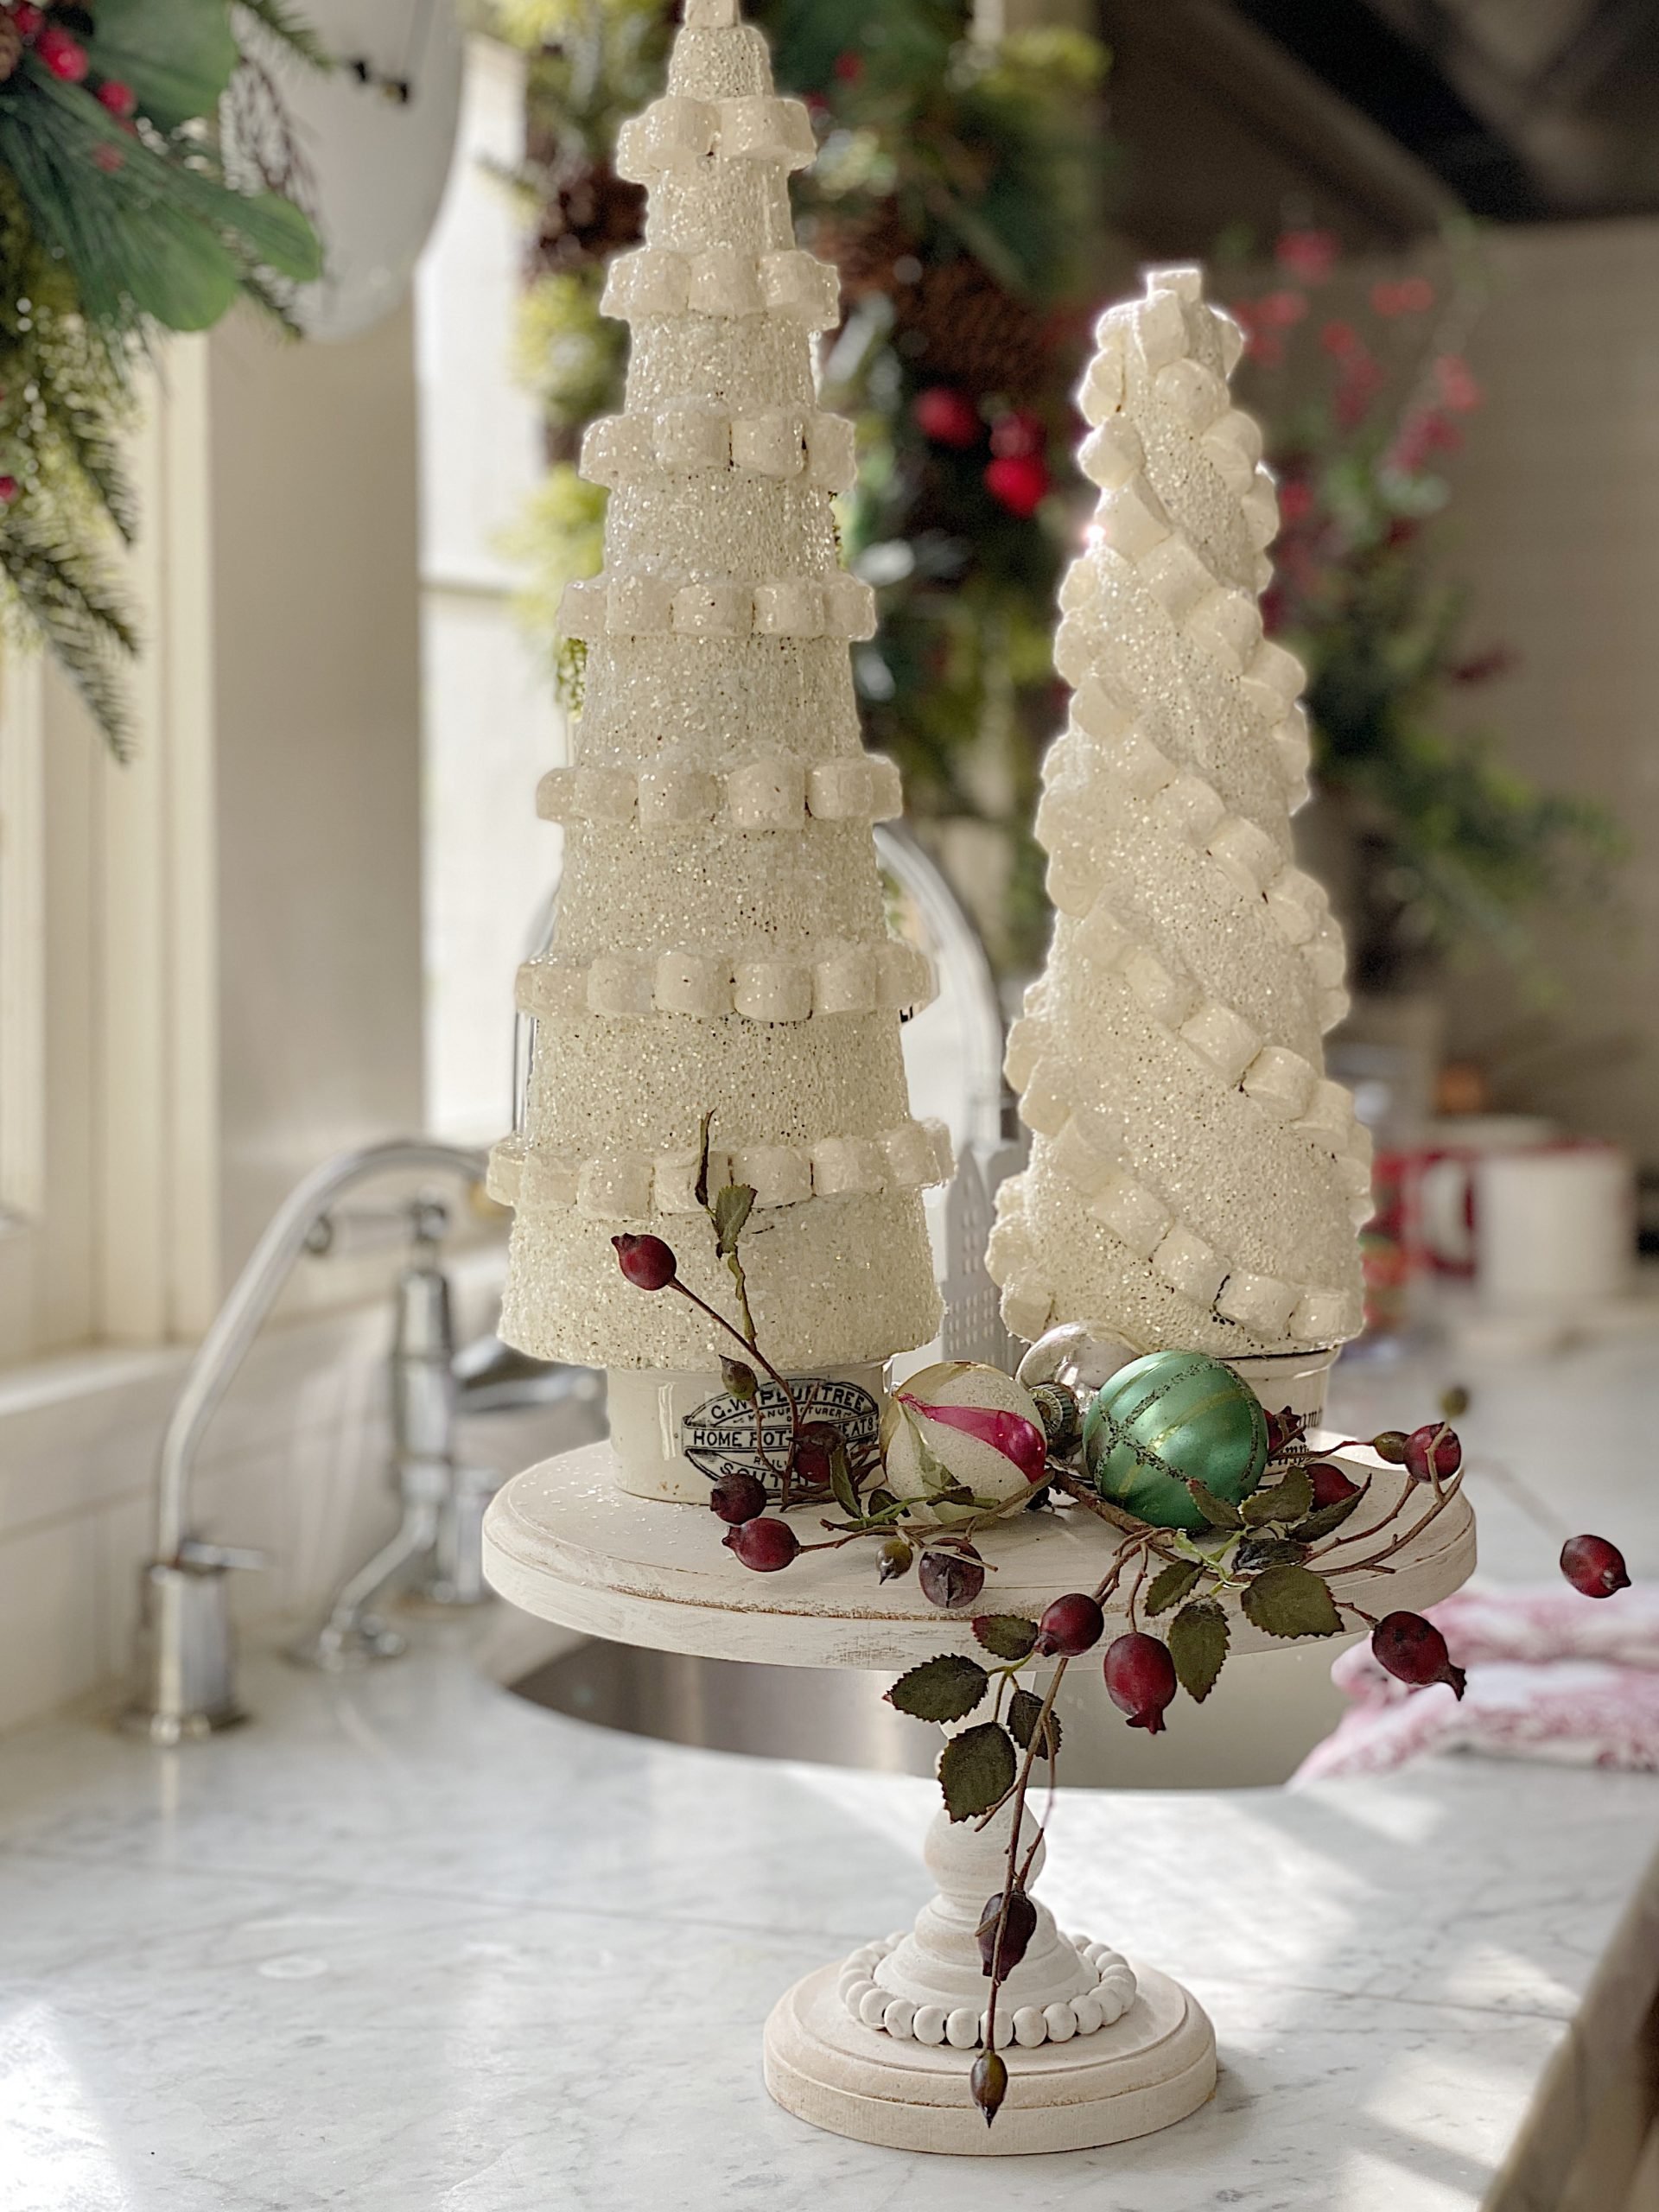 A Christmas Kitchen Celebration with Handmade Trees